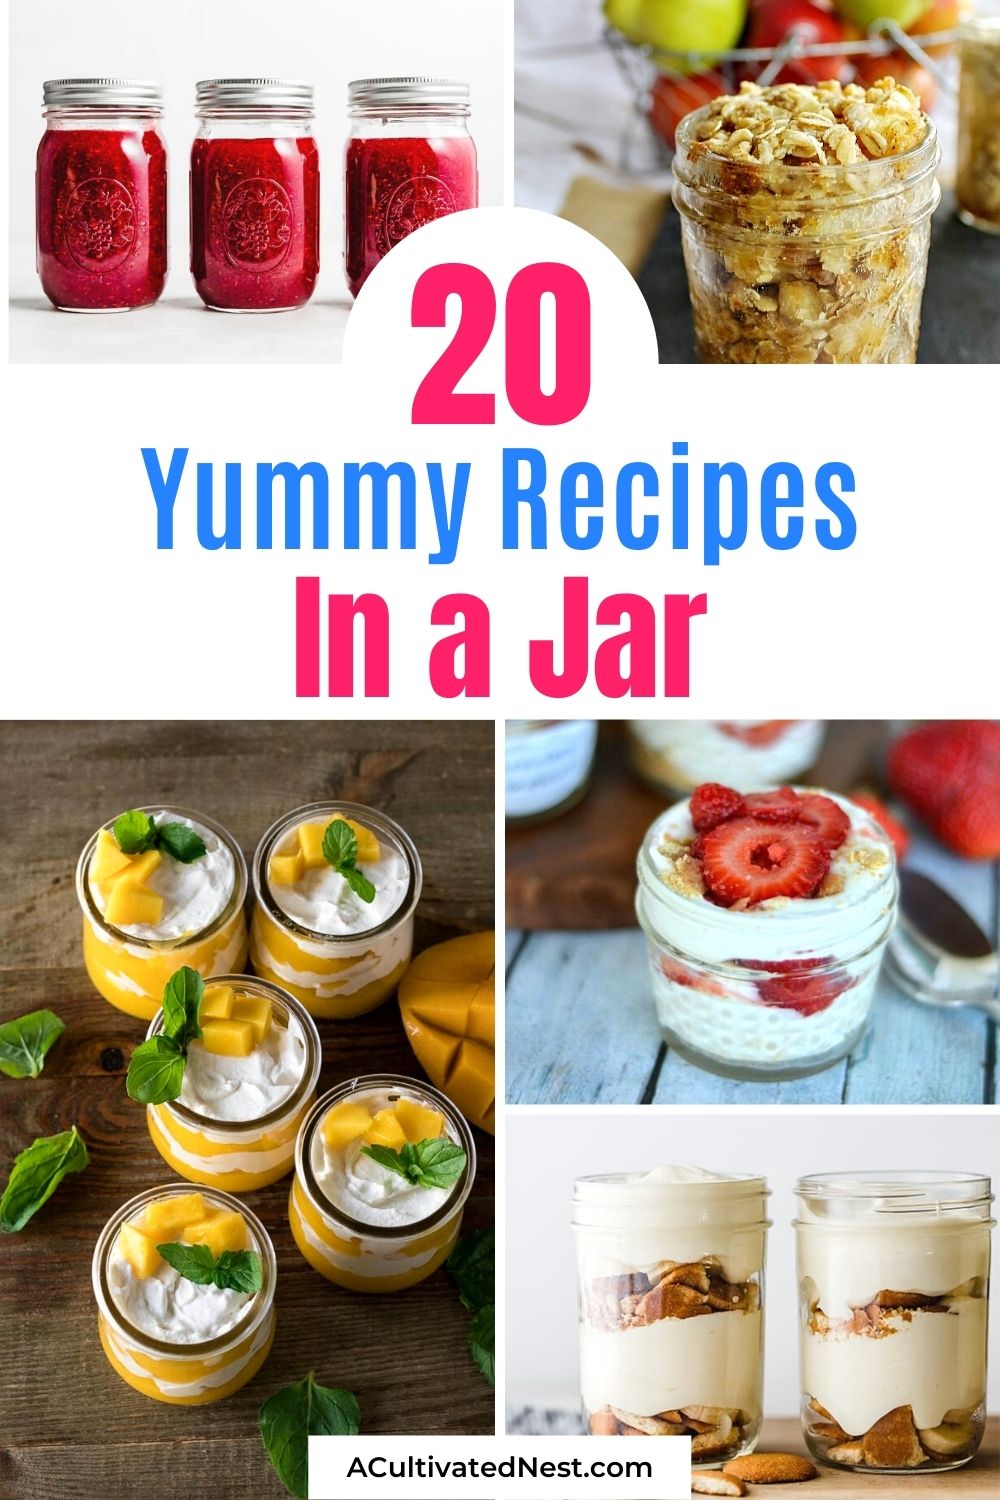 20 Yummy Recipes in a Jar- If you haven't tried any of these yummy recipes in a jar, you're missing out! These make great homemade food gifts, too! | #recipes #desserts #masonJars #edibleGifts #ACultivatedNest